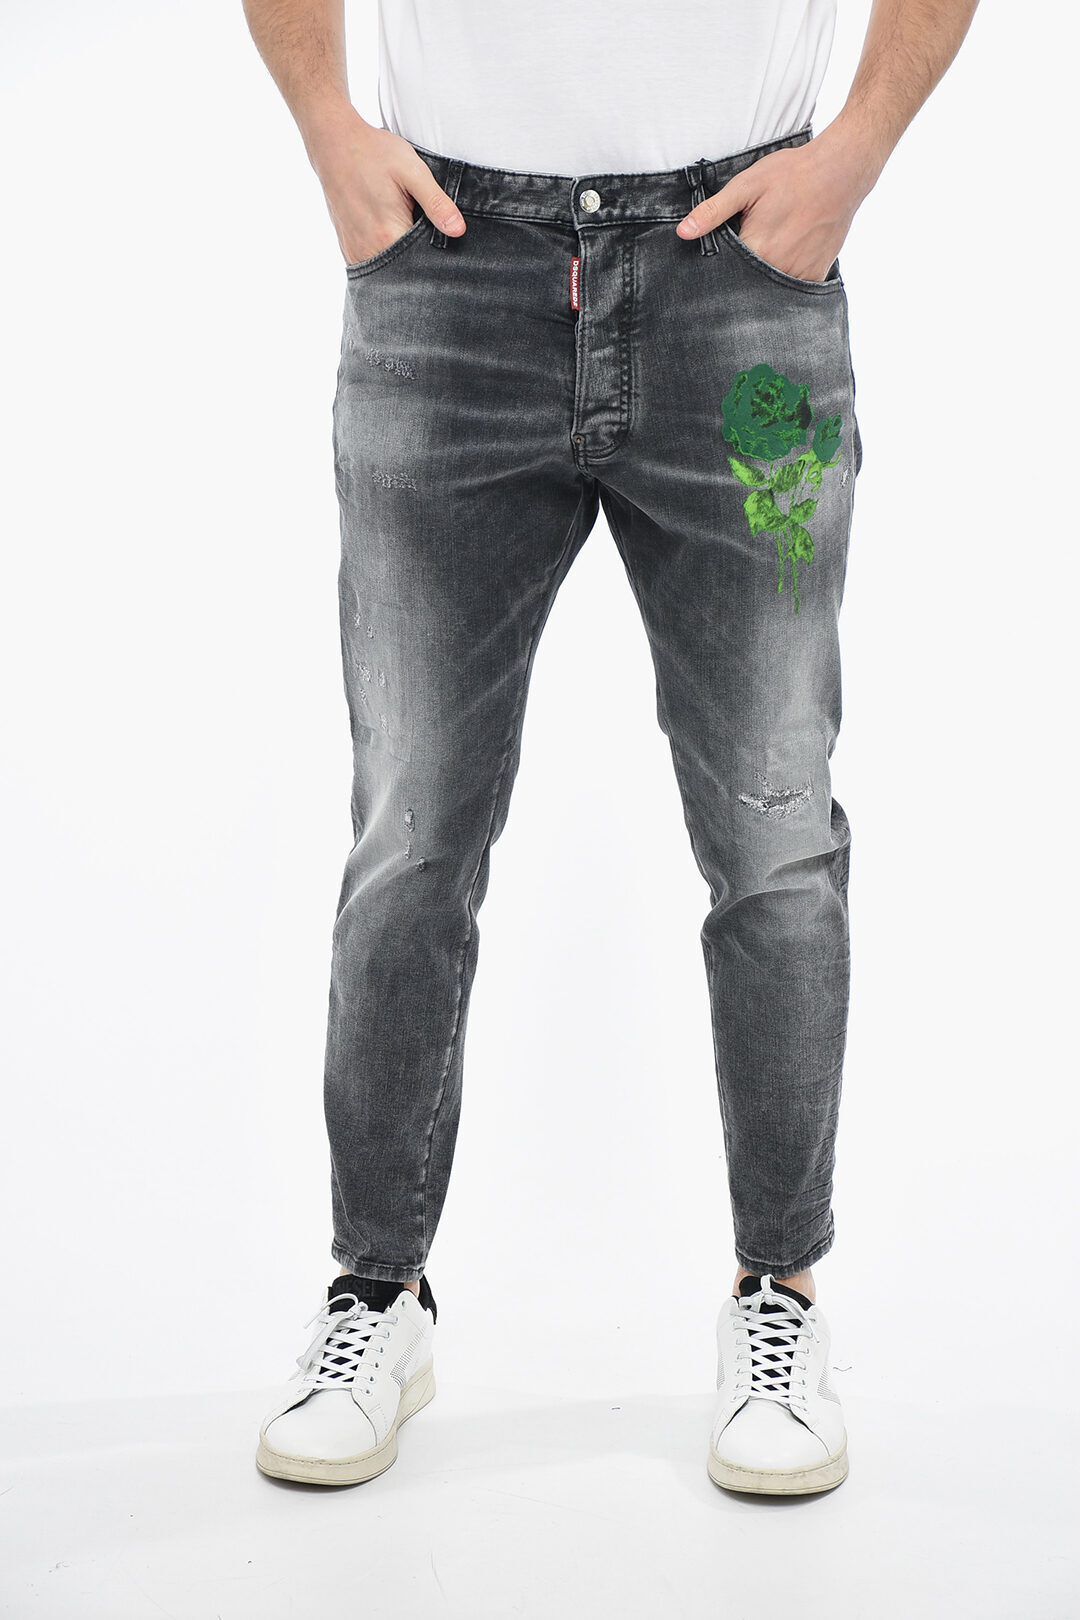 DSQUARED2 ディースクエアード デニム S74LB1225 S30503 900 メンズ DISTRESSED RELAX LONG CROTCH DENIMS WITH FLORAL PRINT 16CM 【関税・送料無料】【ラッピング無料】 dk